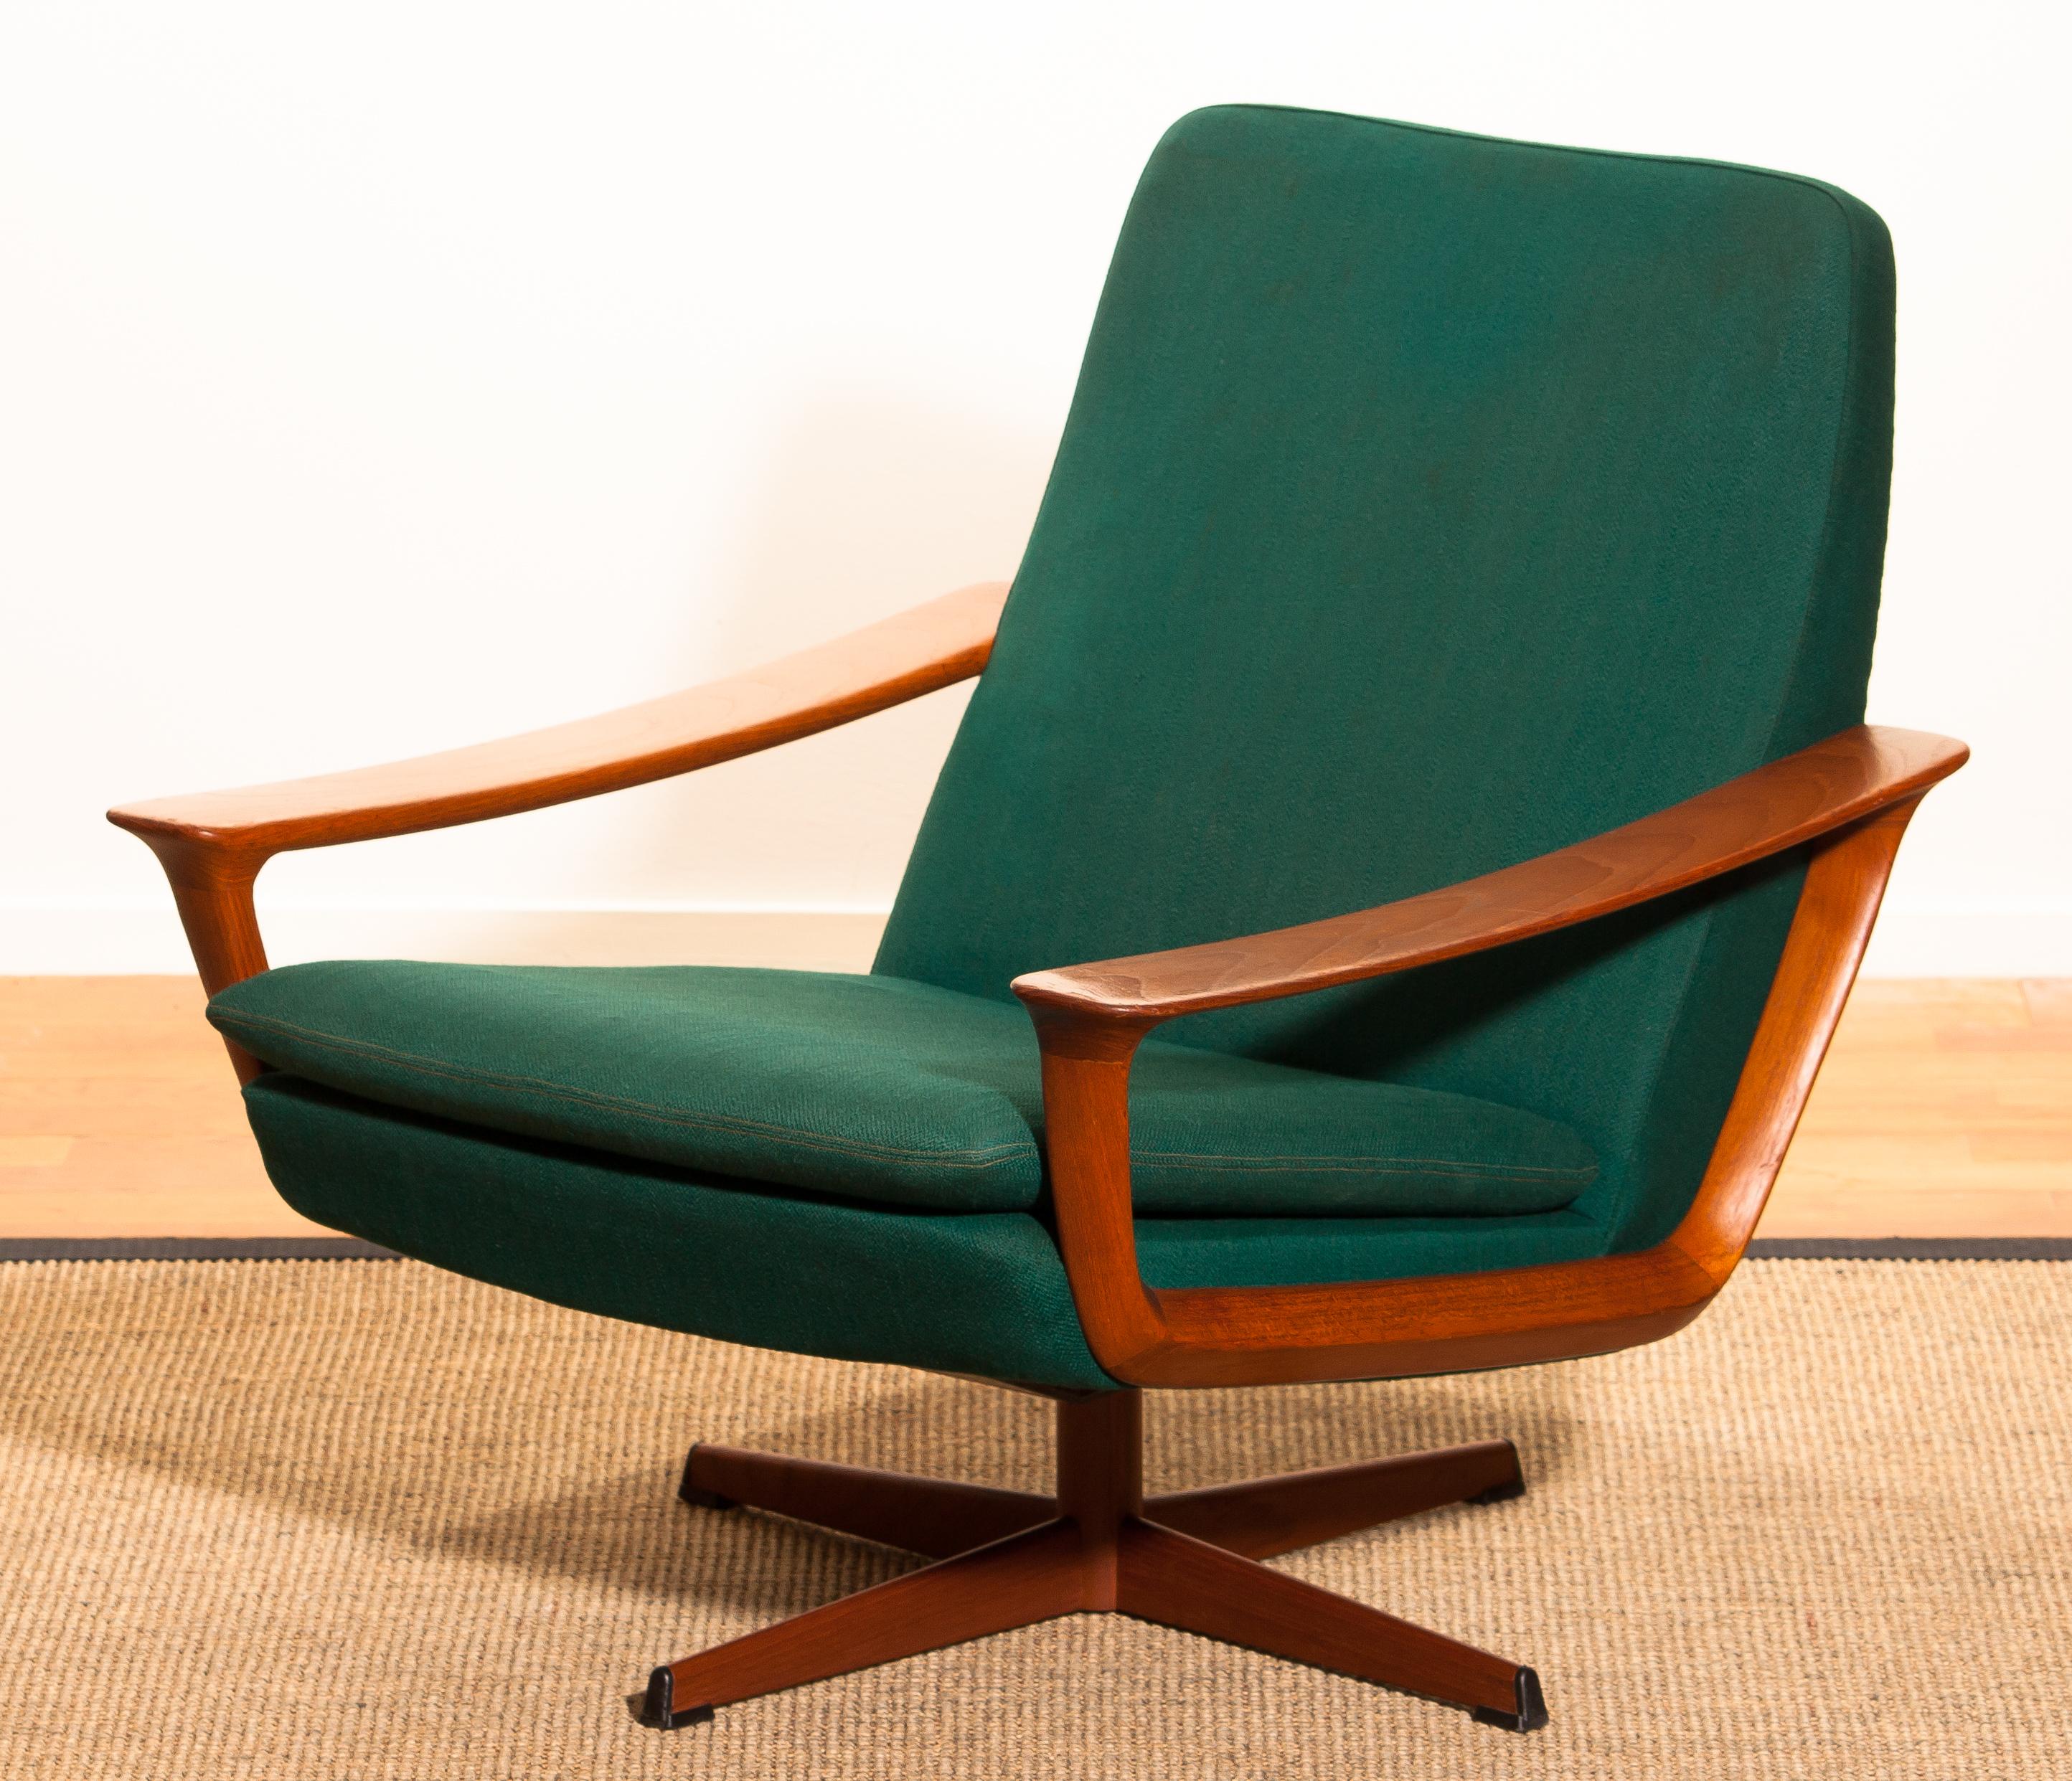 1960s, Teak Set of Two Swivel Chairs by Johannes Andersson for Trensum, Denmark 12